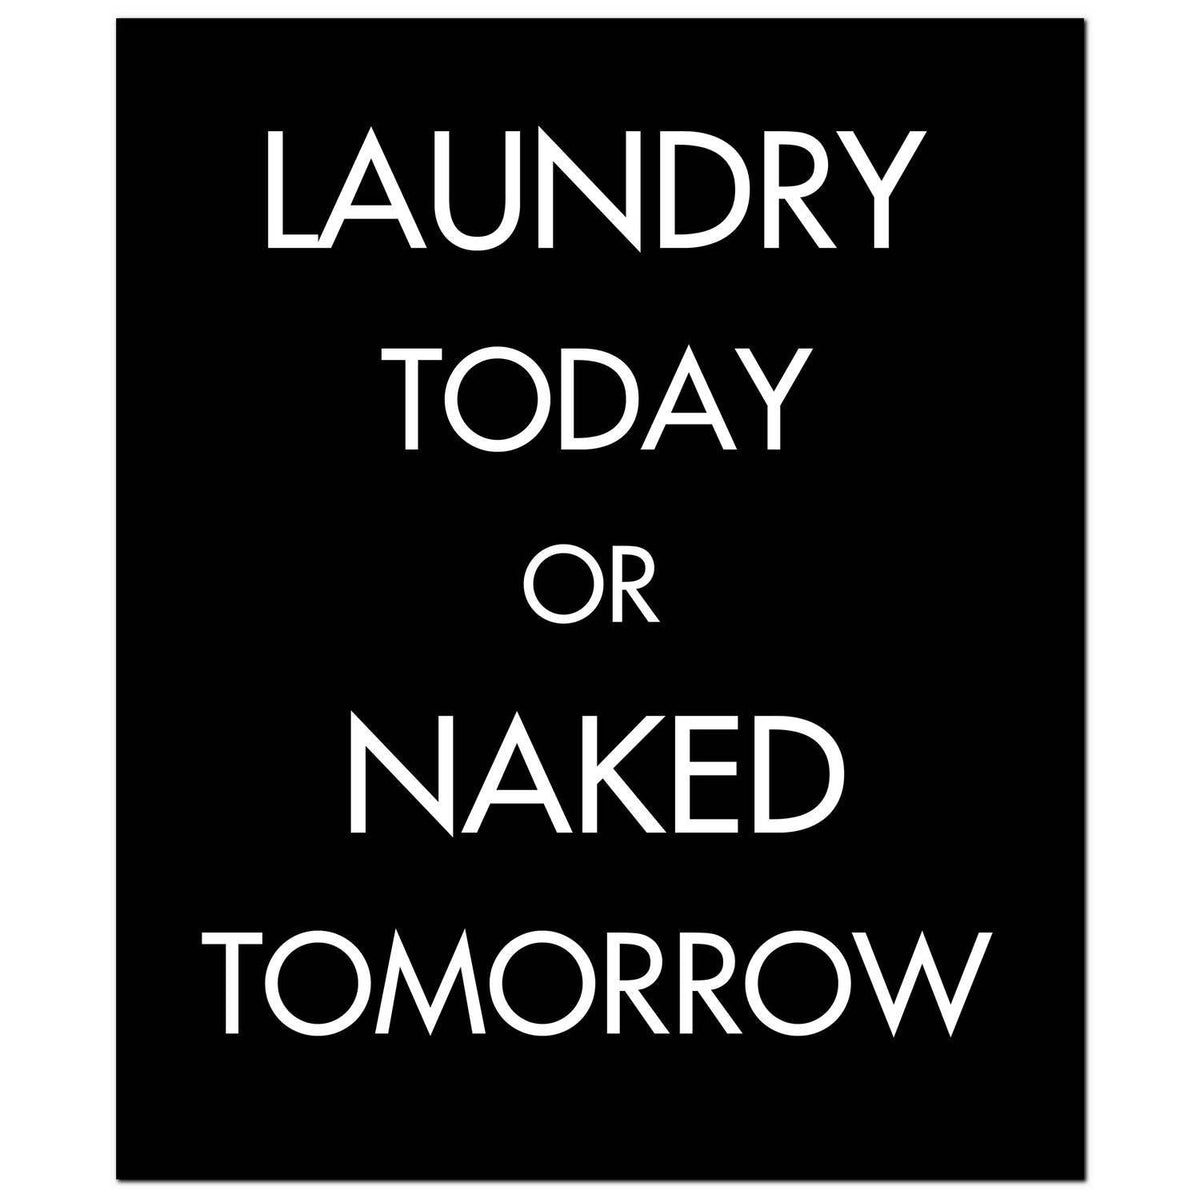 Laundry Today Or Naked Tomorrow Silver Foil Plaque - Vookoo Lifestyle